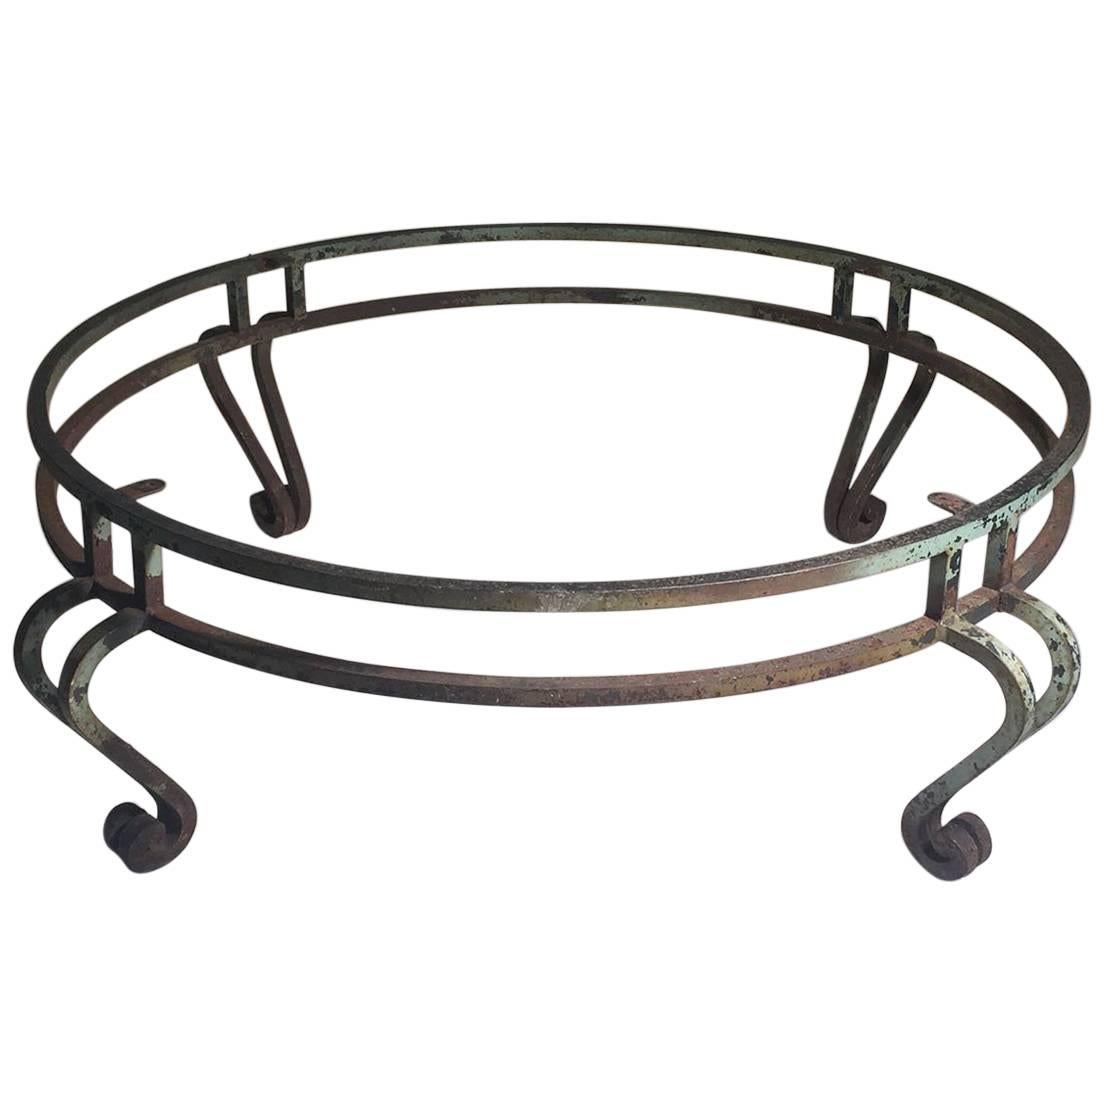 Large Round Maison Ramsay Wrought Iron Coffee Table